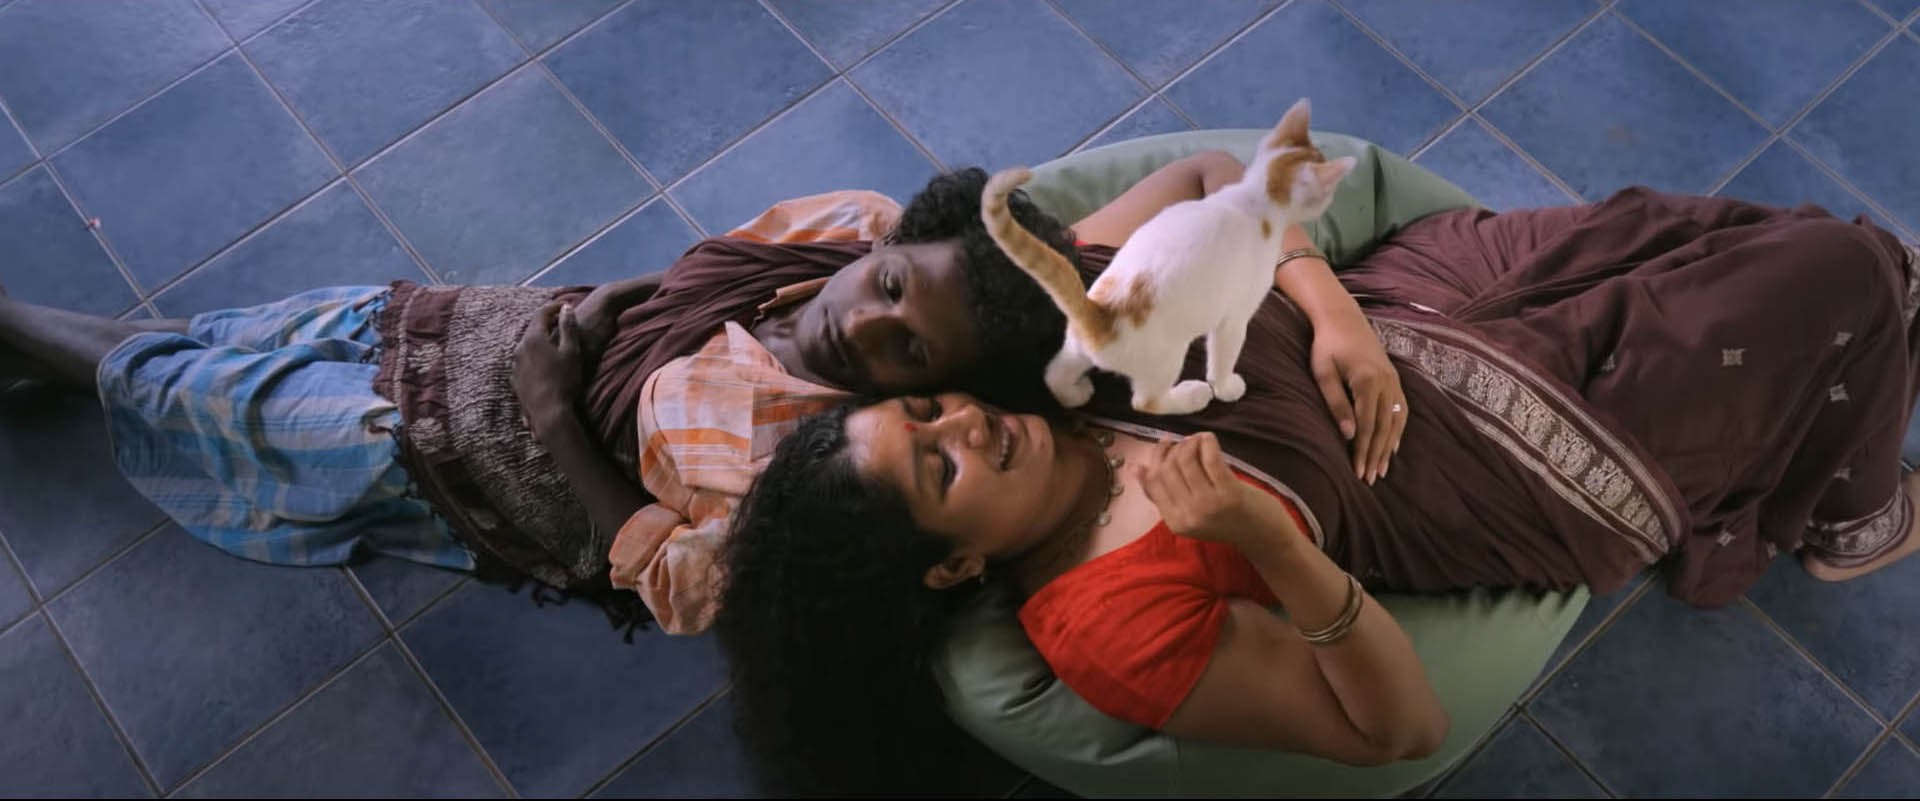 Top-angle shot of Gulikan and Dancer--two characters form the film--lying on a beanbag with their heads next to each other, stretched out in opposite directions, with a cat standing on the Dancer's chest